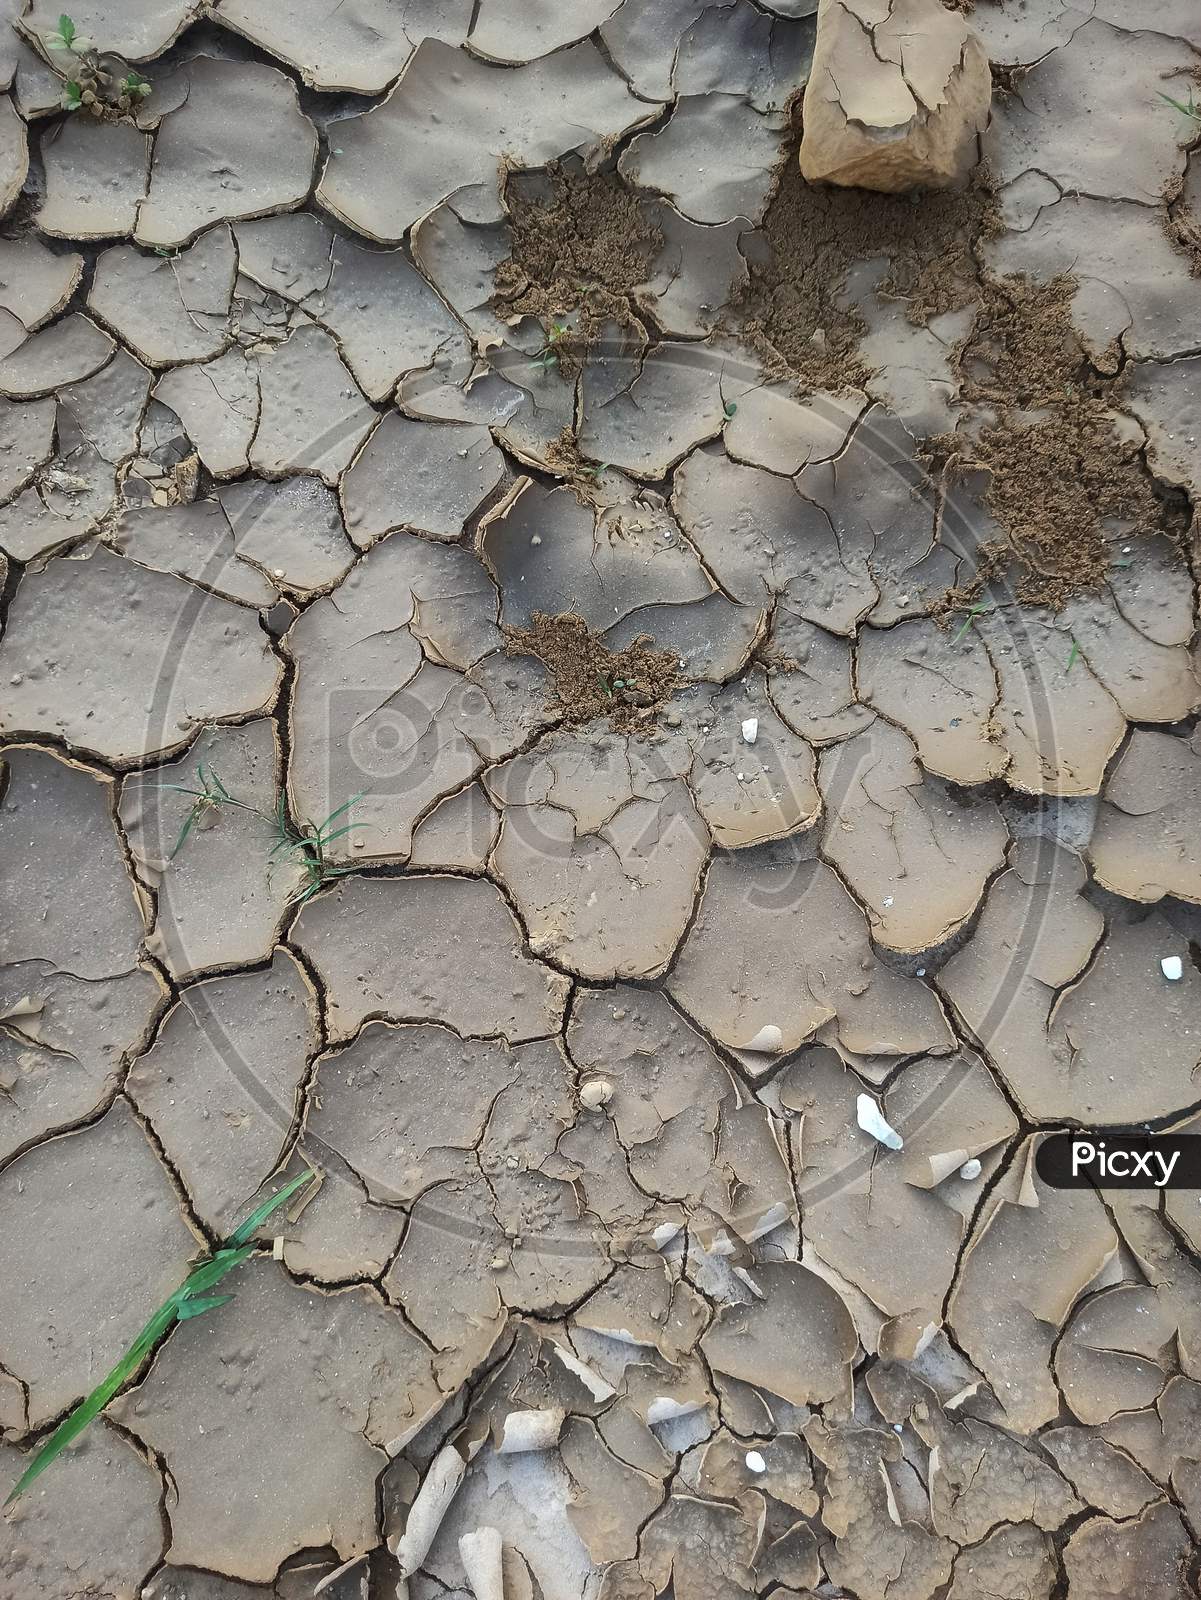 Dry cracked land due to the scarcity of water in summer.